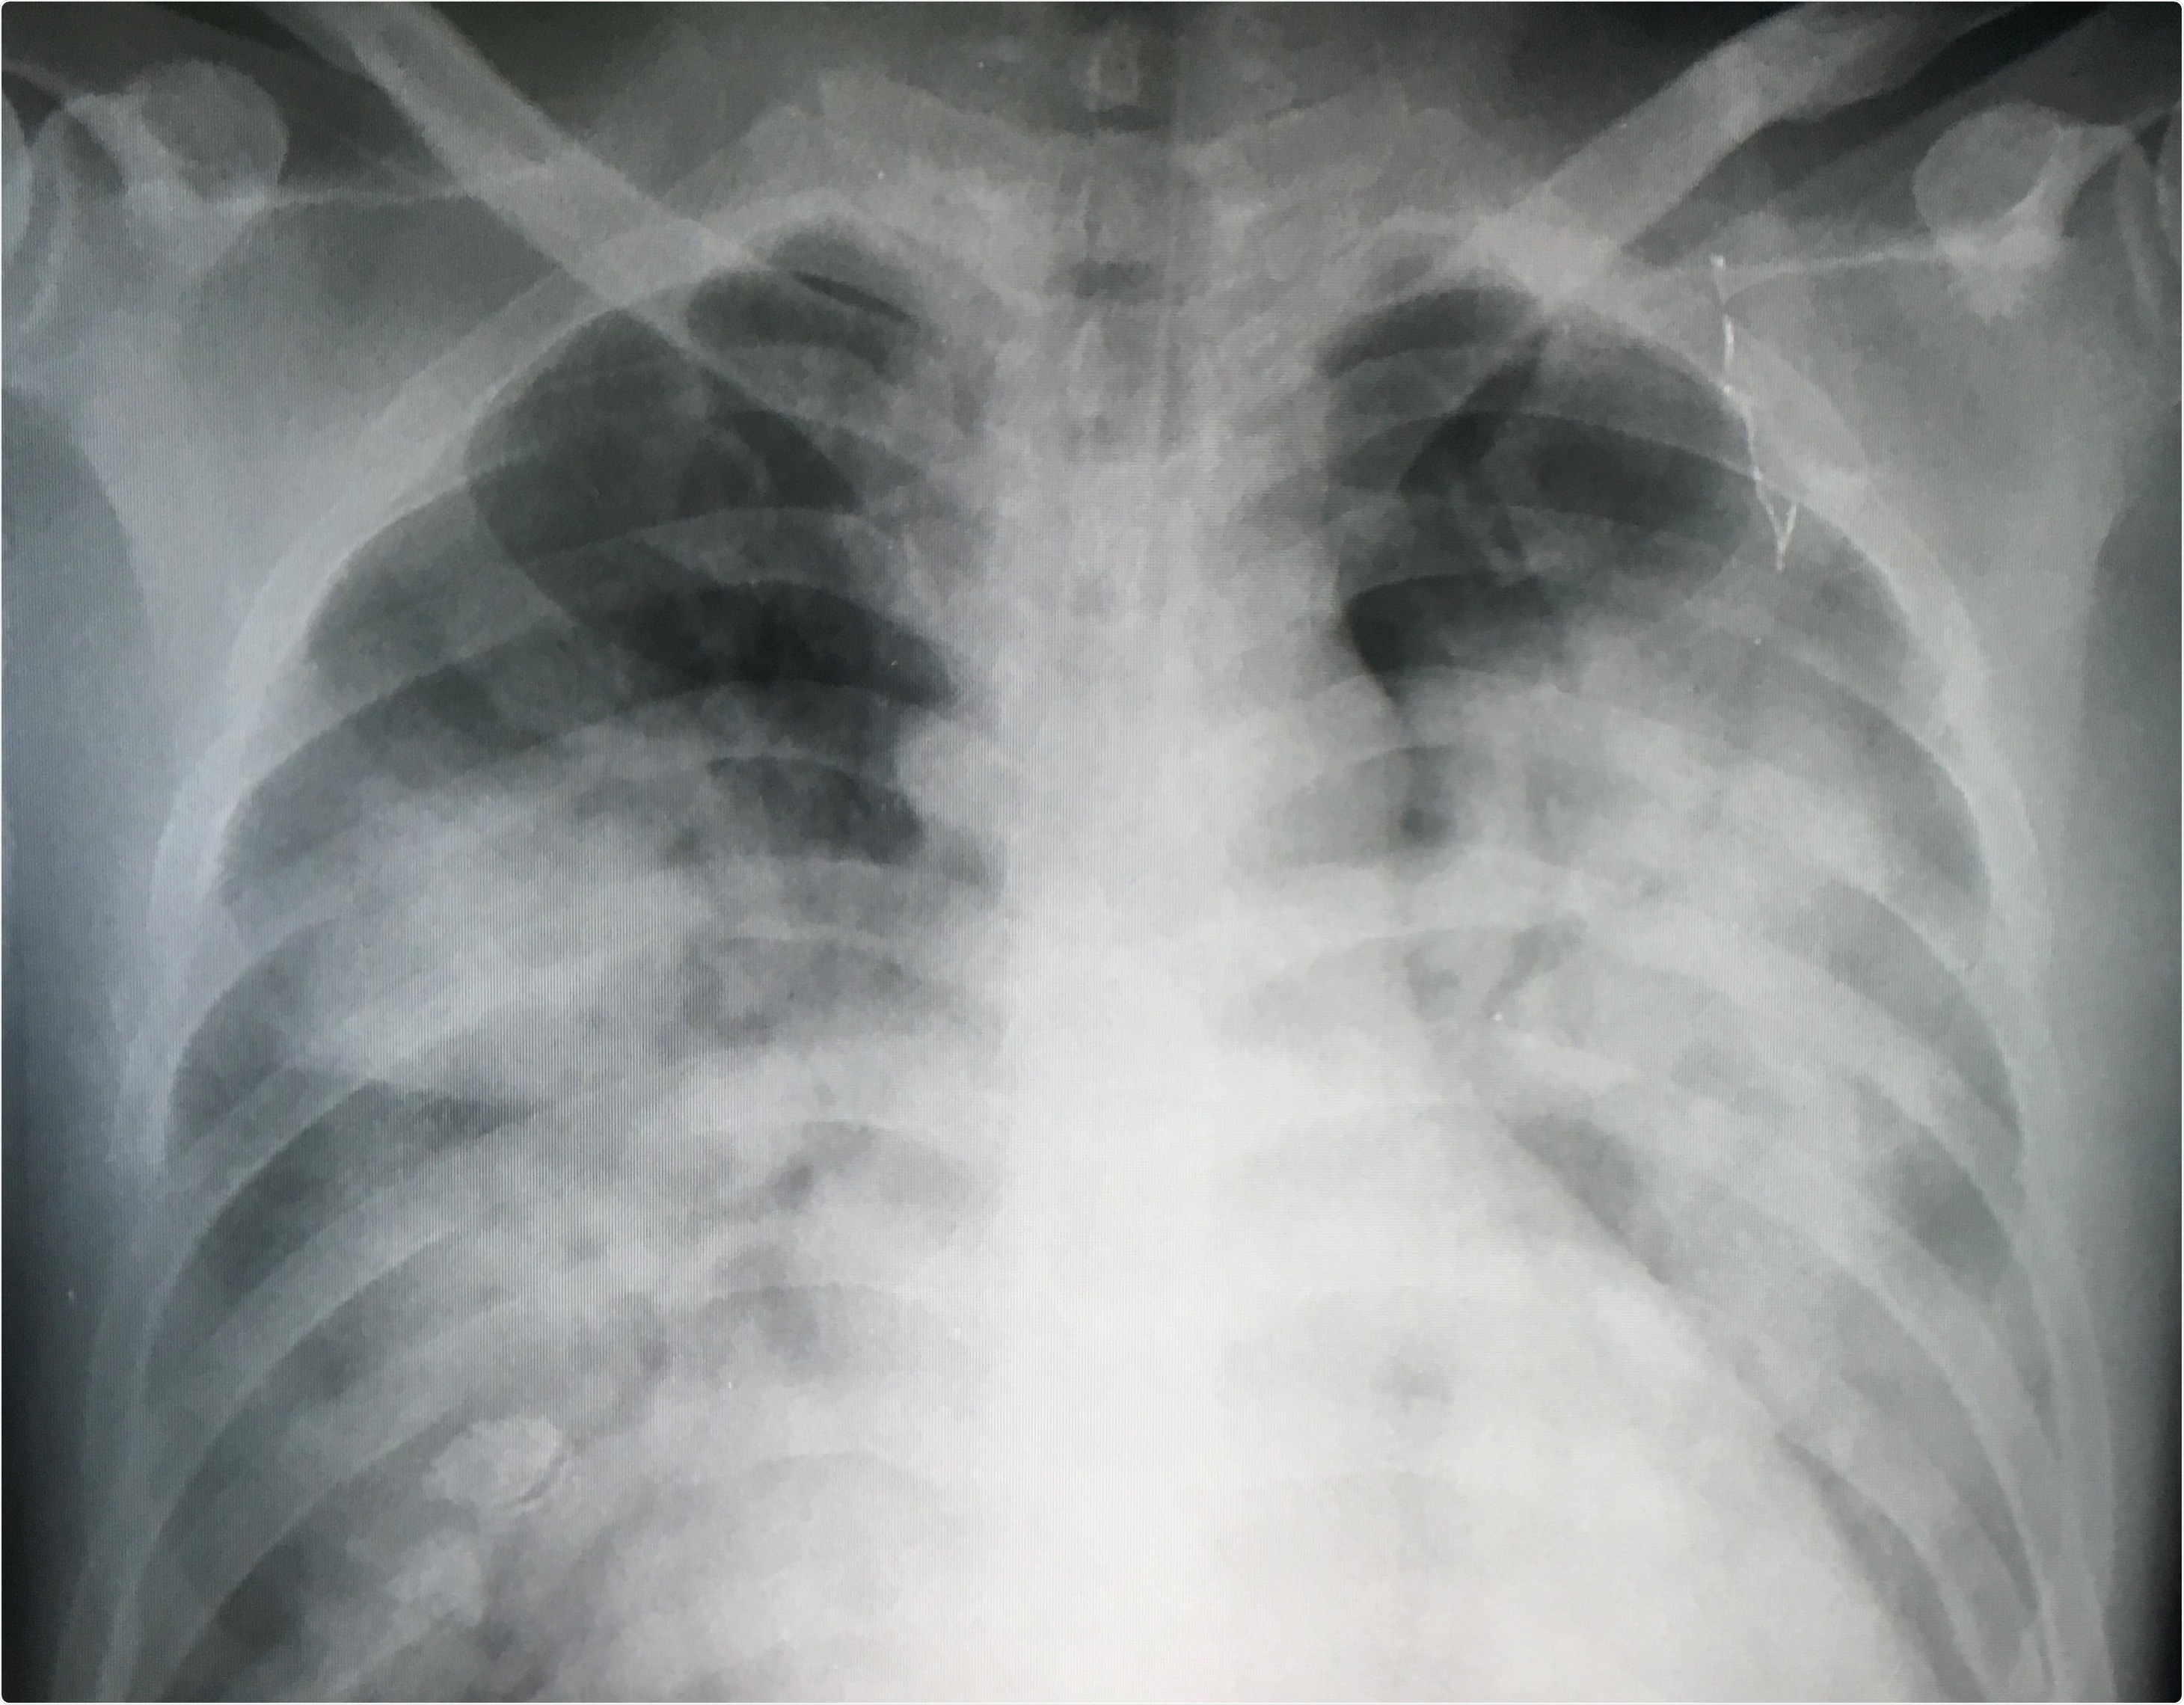 Study: Inhaled Prostacyclin Improves Oxygenation in Patients with COVID-19-induced Acute Respiratory Distress Syndrome. Image Credit: Kotcha K / Shutterstock